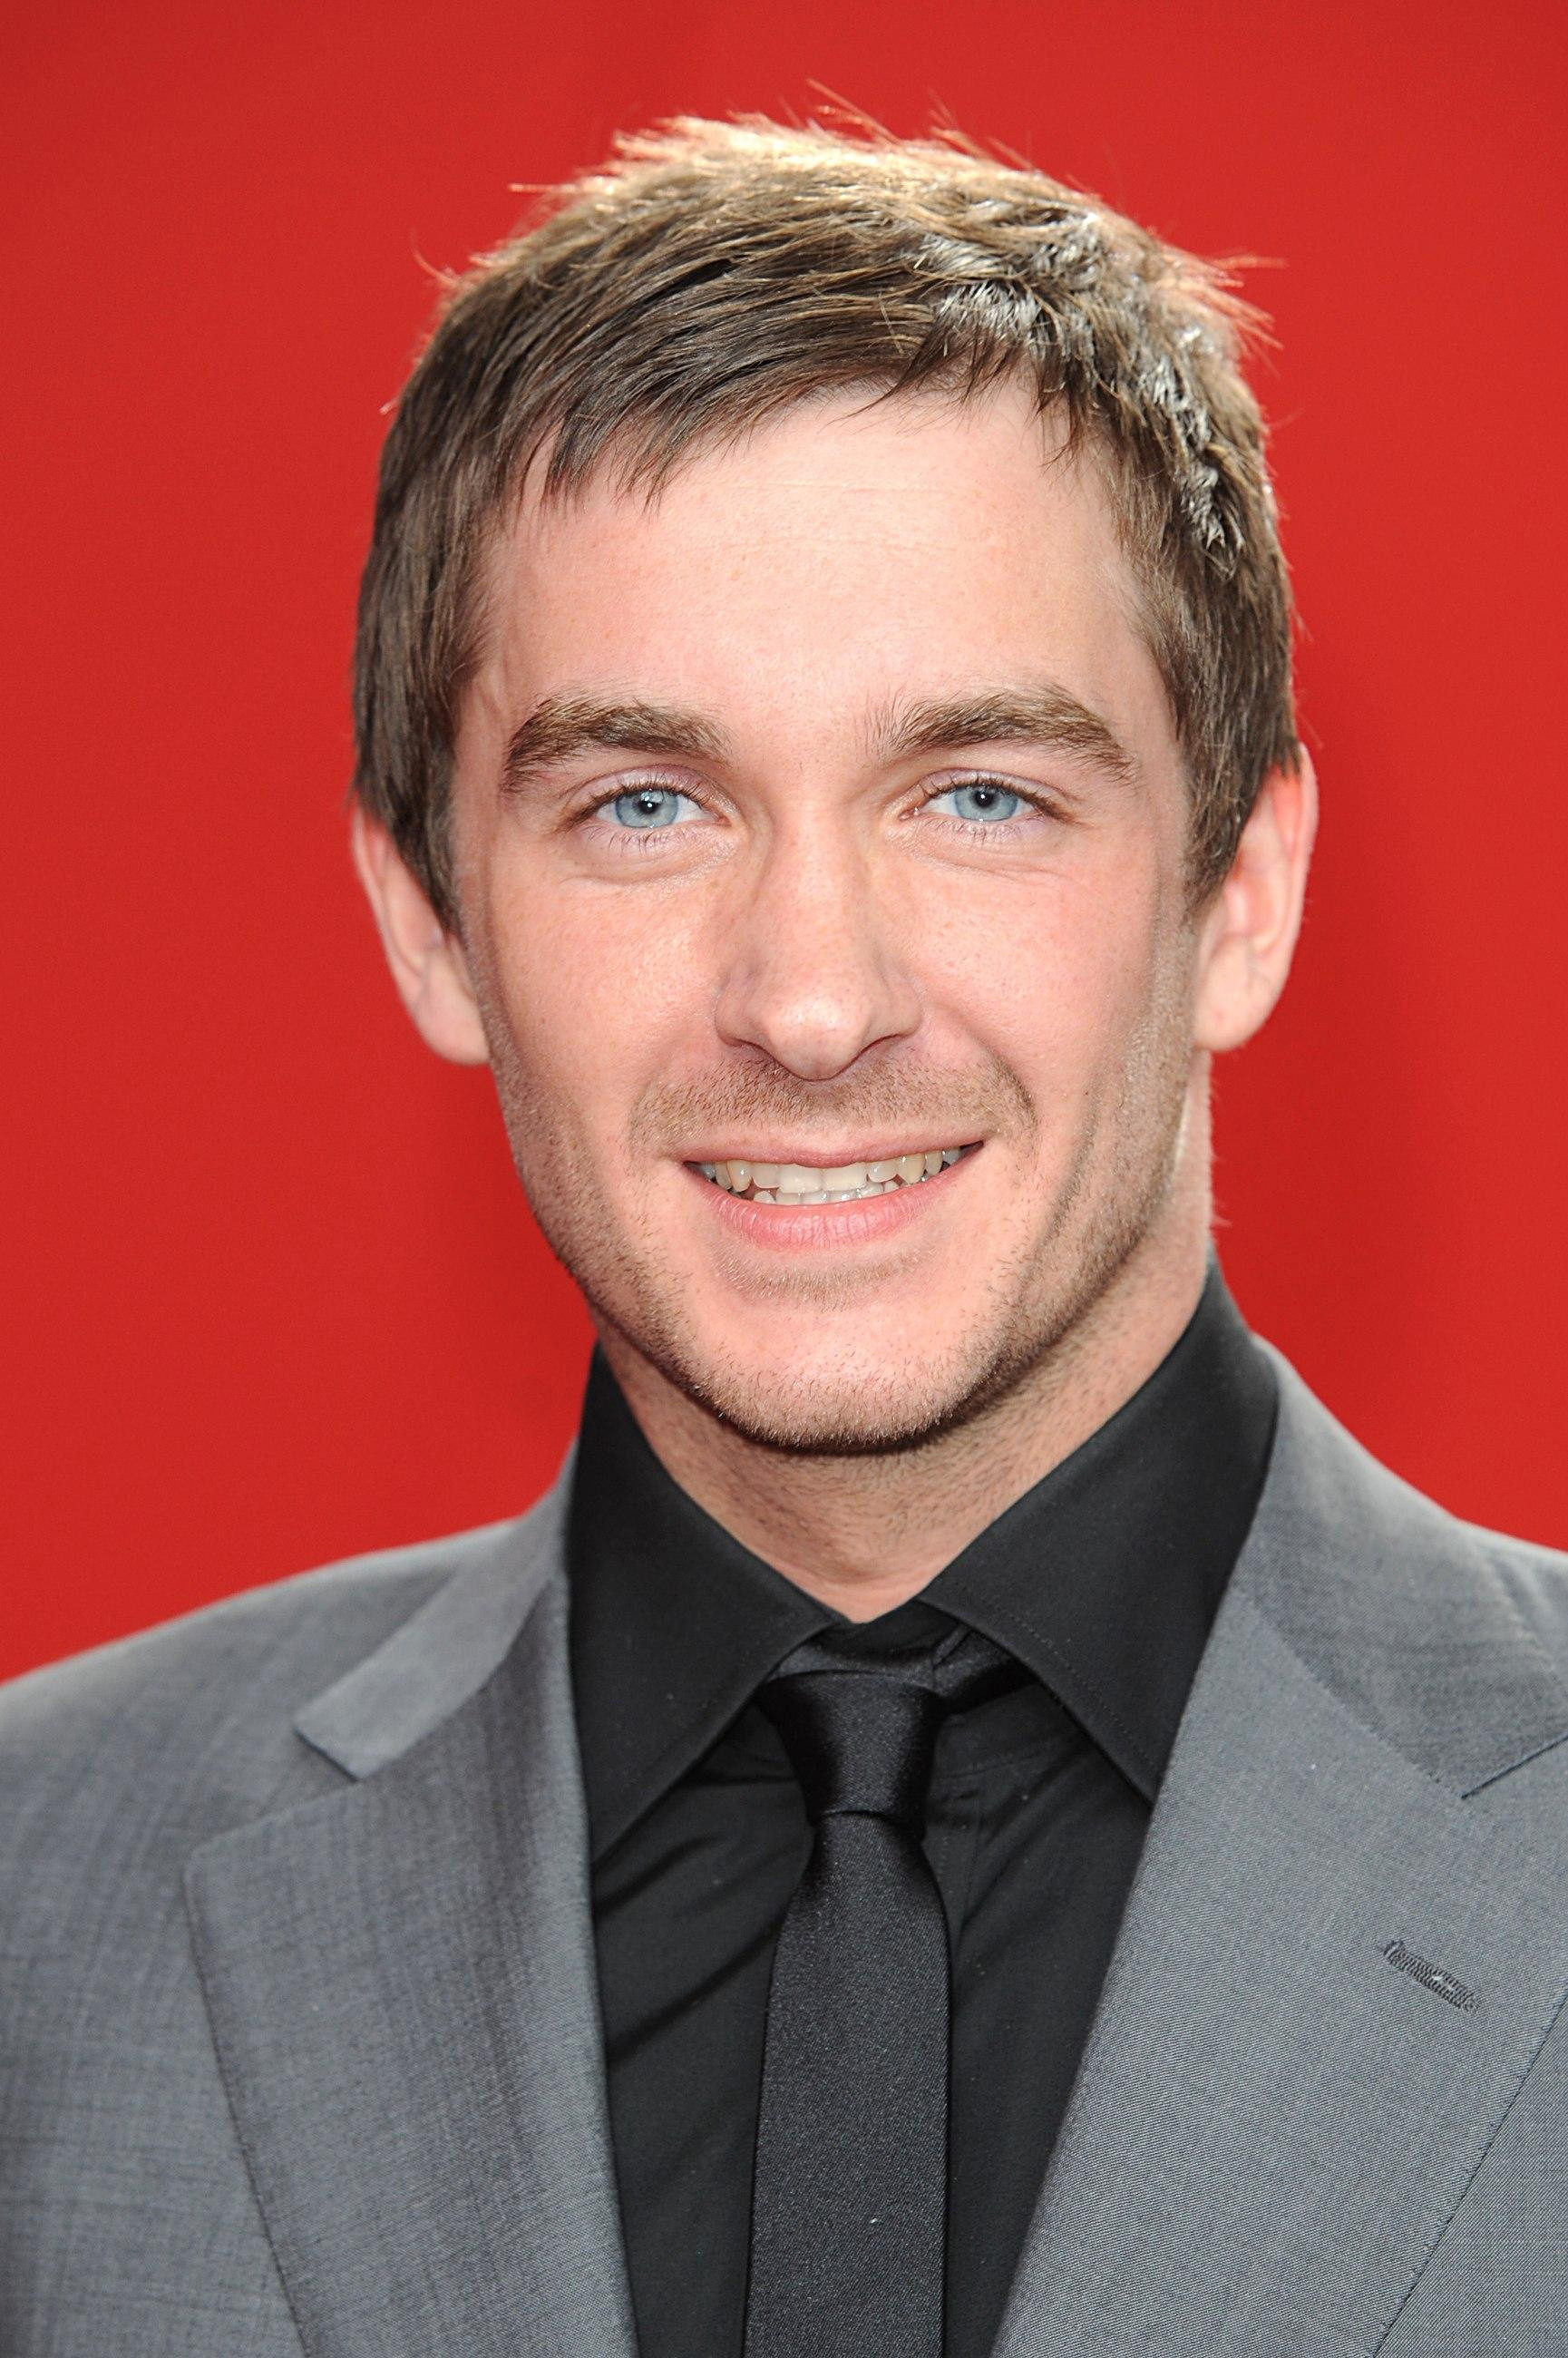 Anthony Quinlan played Gilly Roach on Hollyoaks